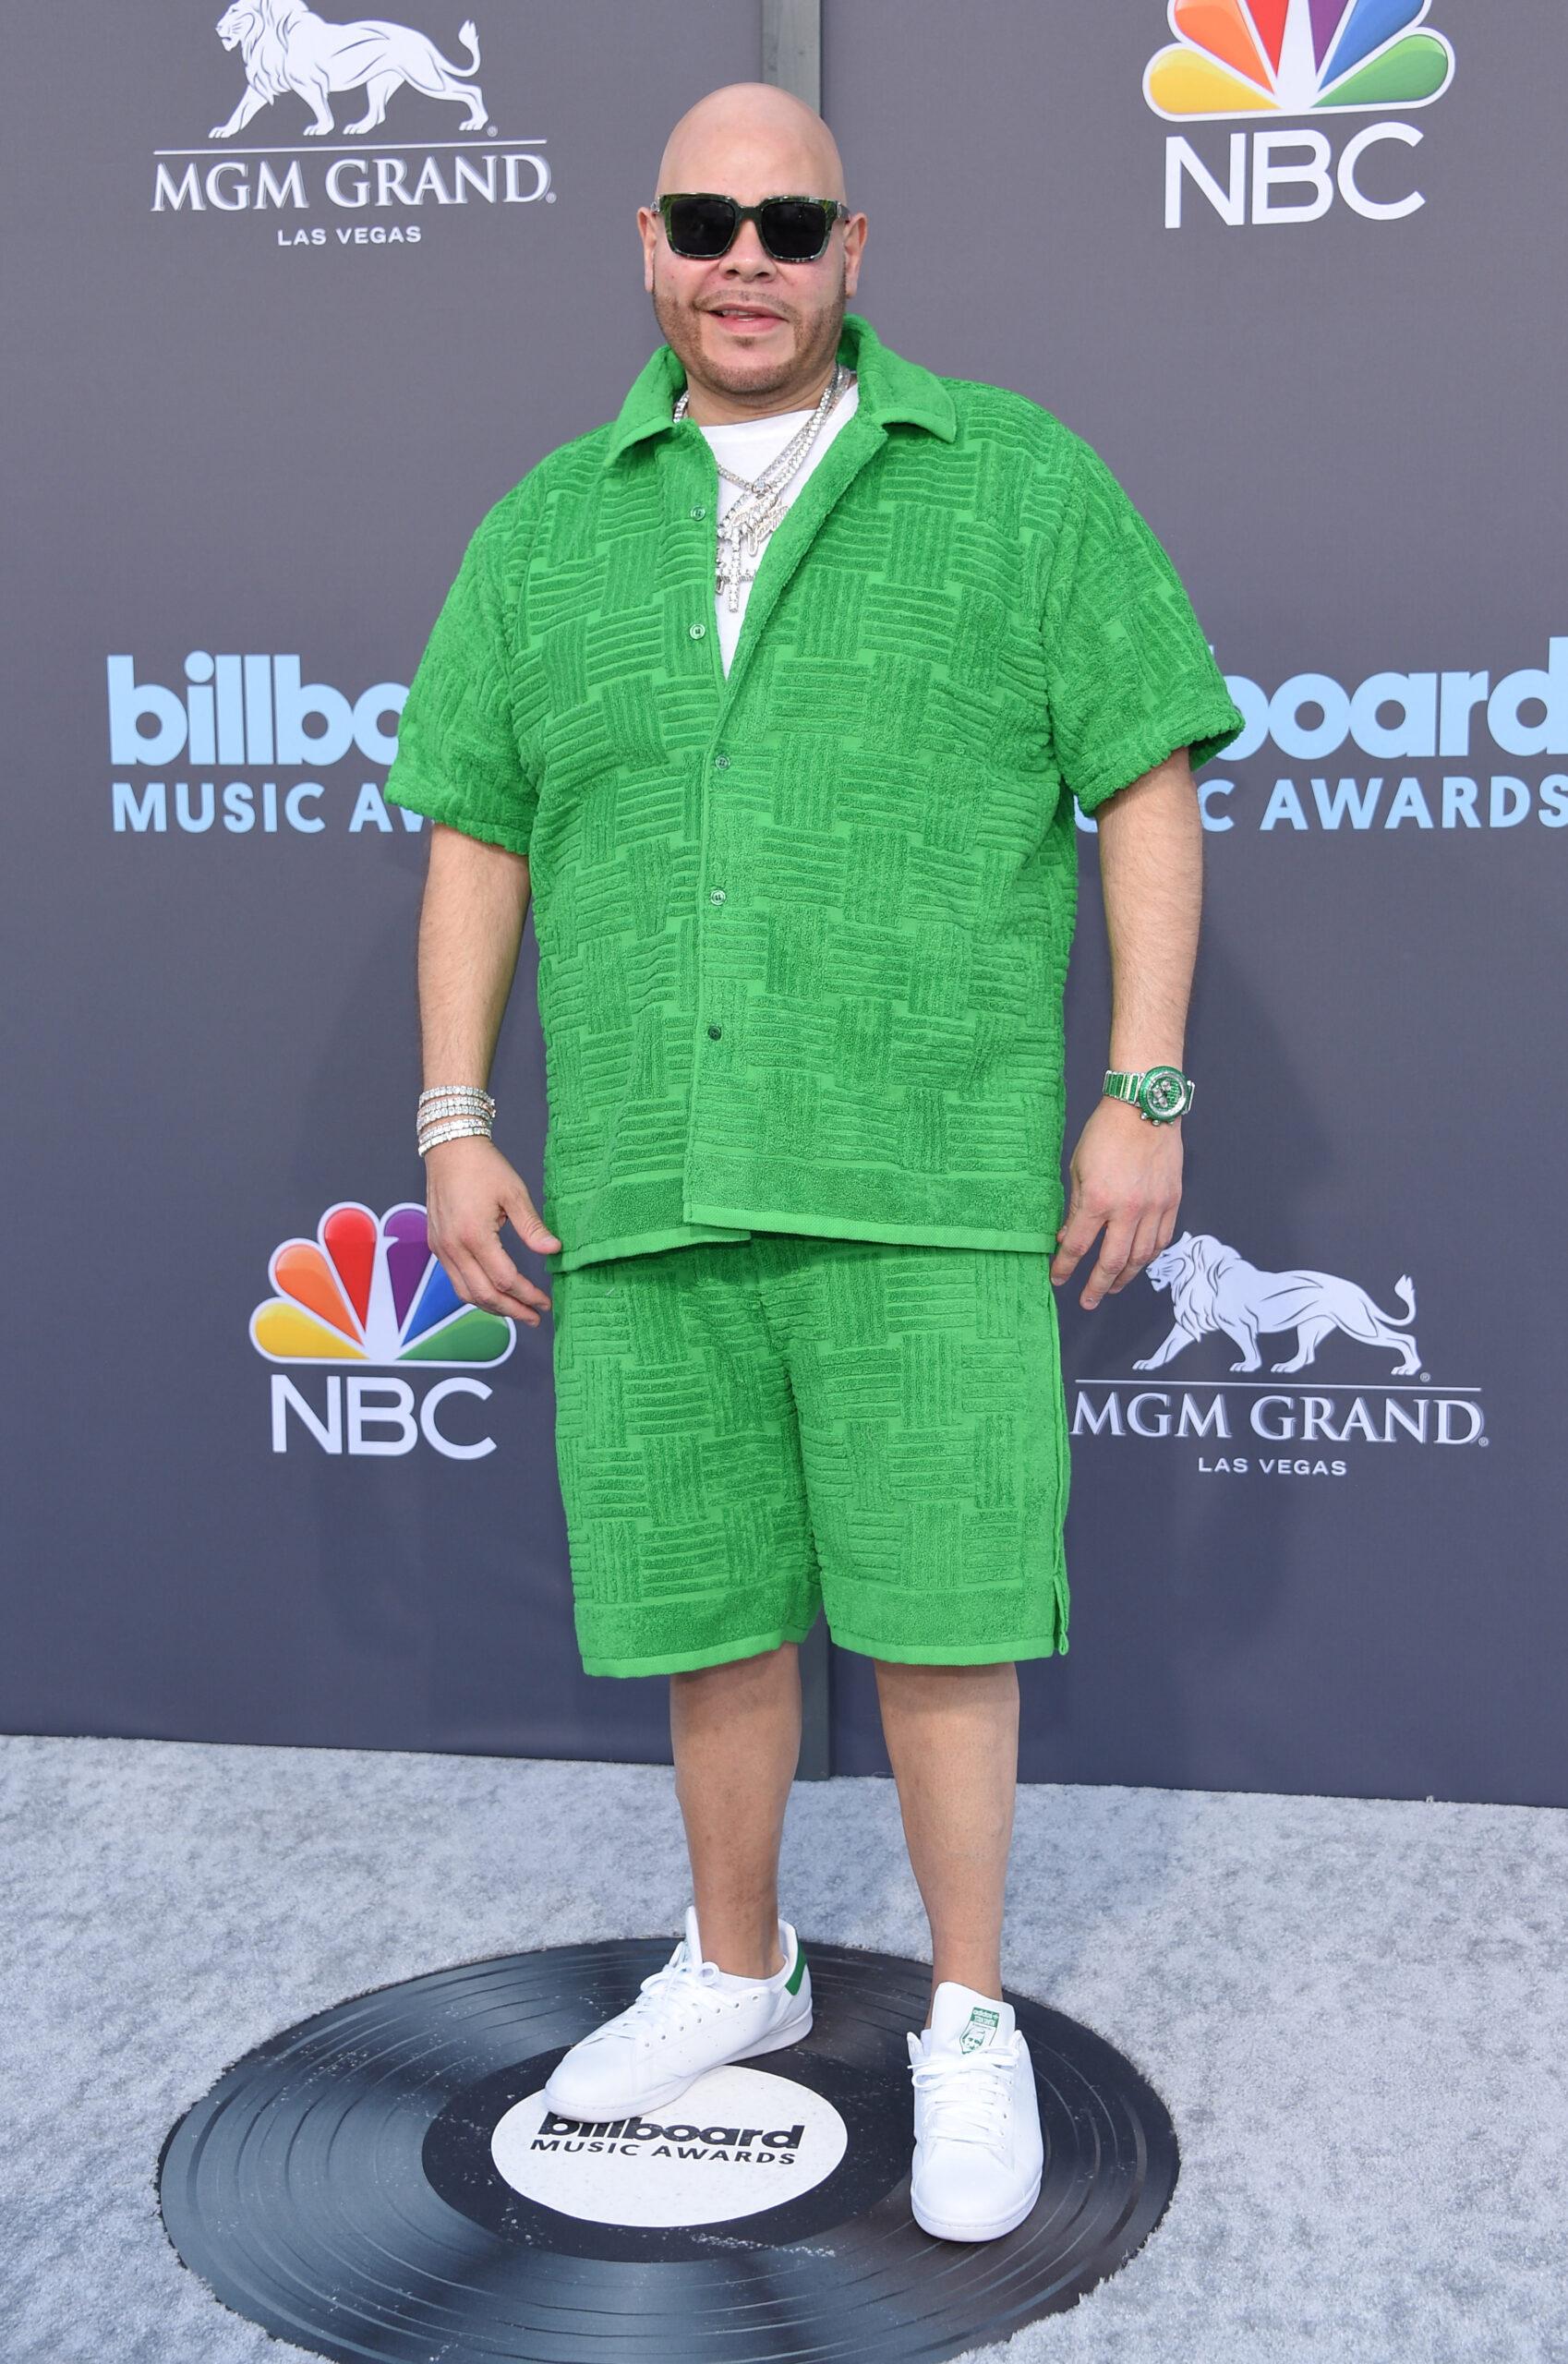 Fat Joe Opens Up About His INCREDIBLE 200 Pounds Weight Loss Journey: 'I Really Want To Be Healthy' 